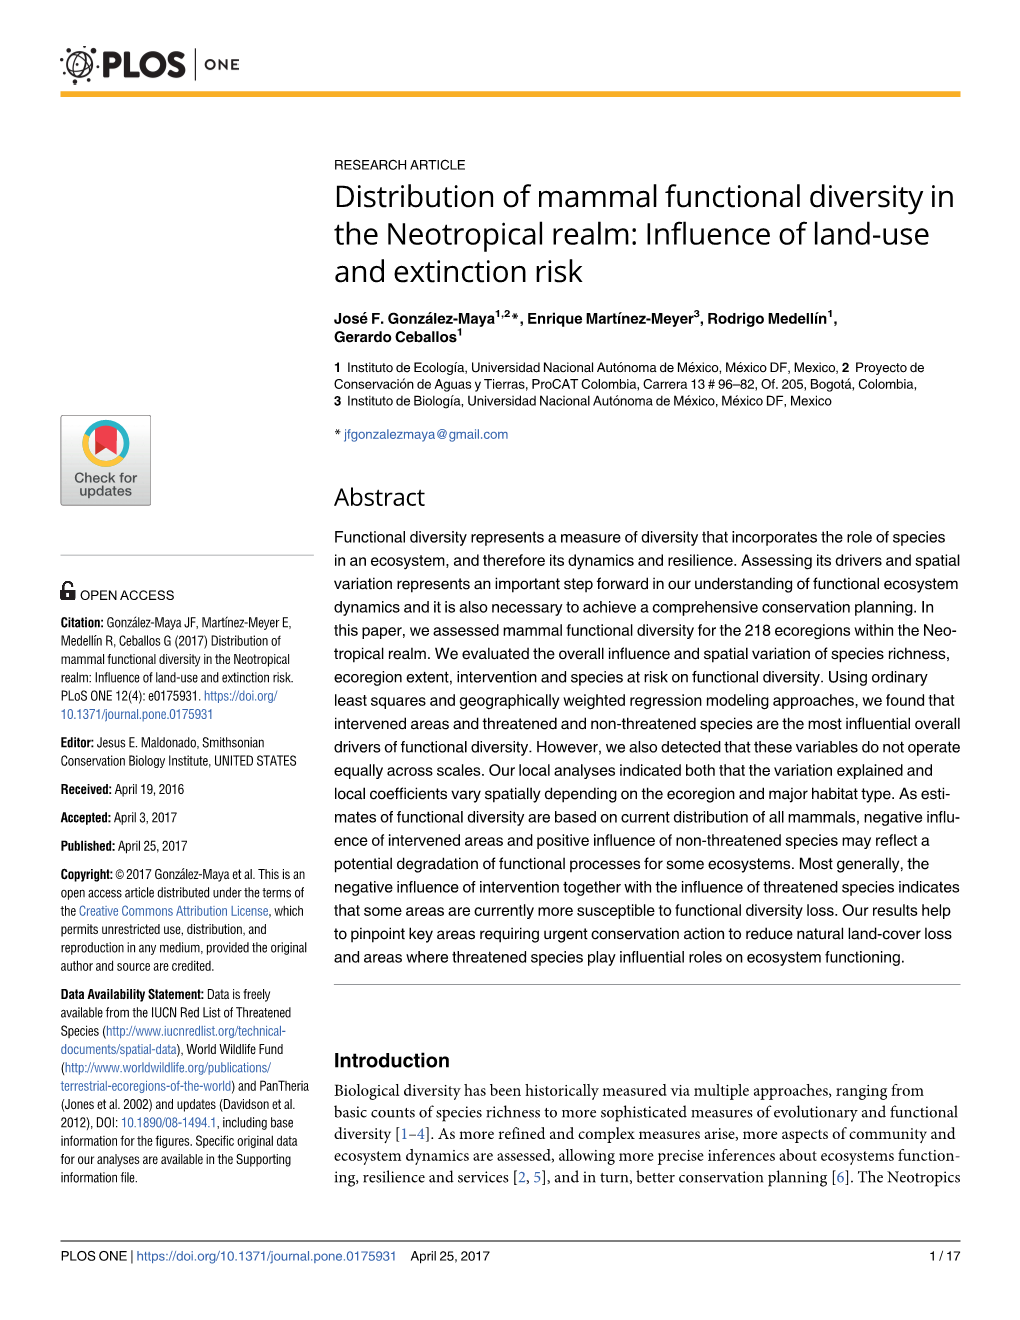 Distribution of Mammal Functional Diversity in the Neotropical Realm: Influence of Land-Use and Extinction Risk